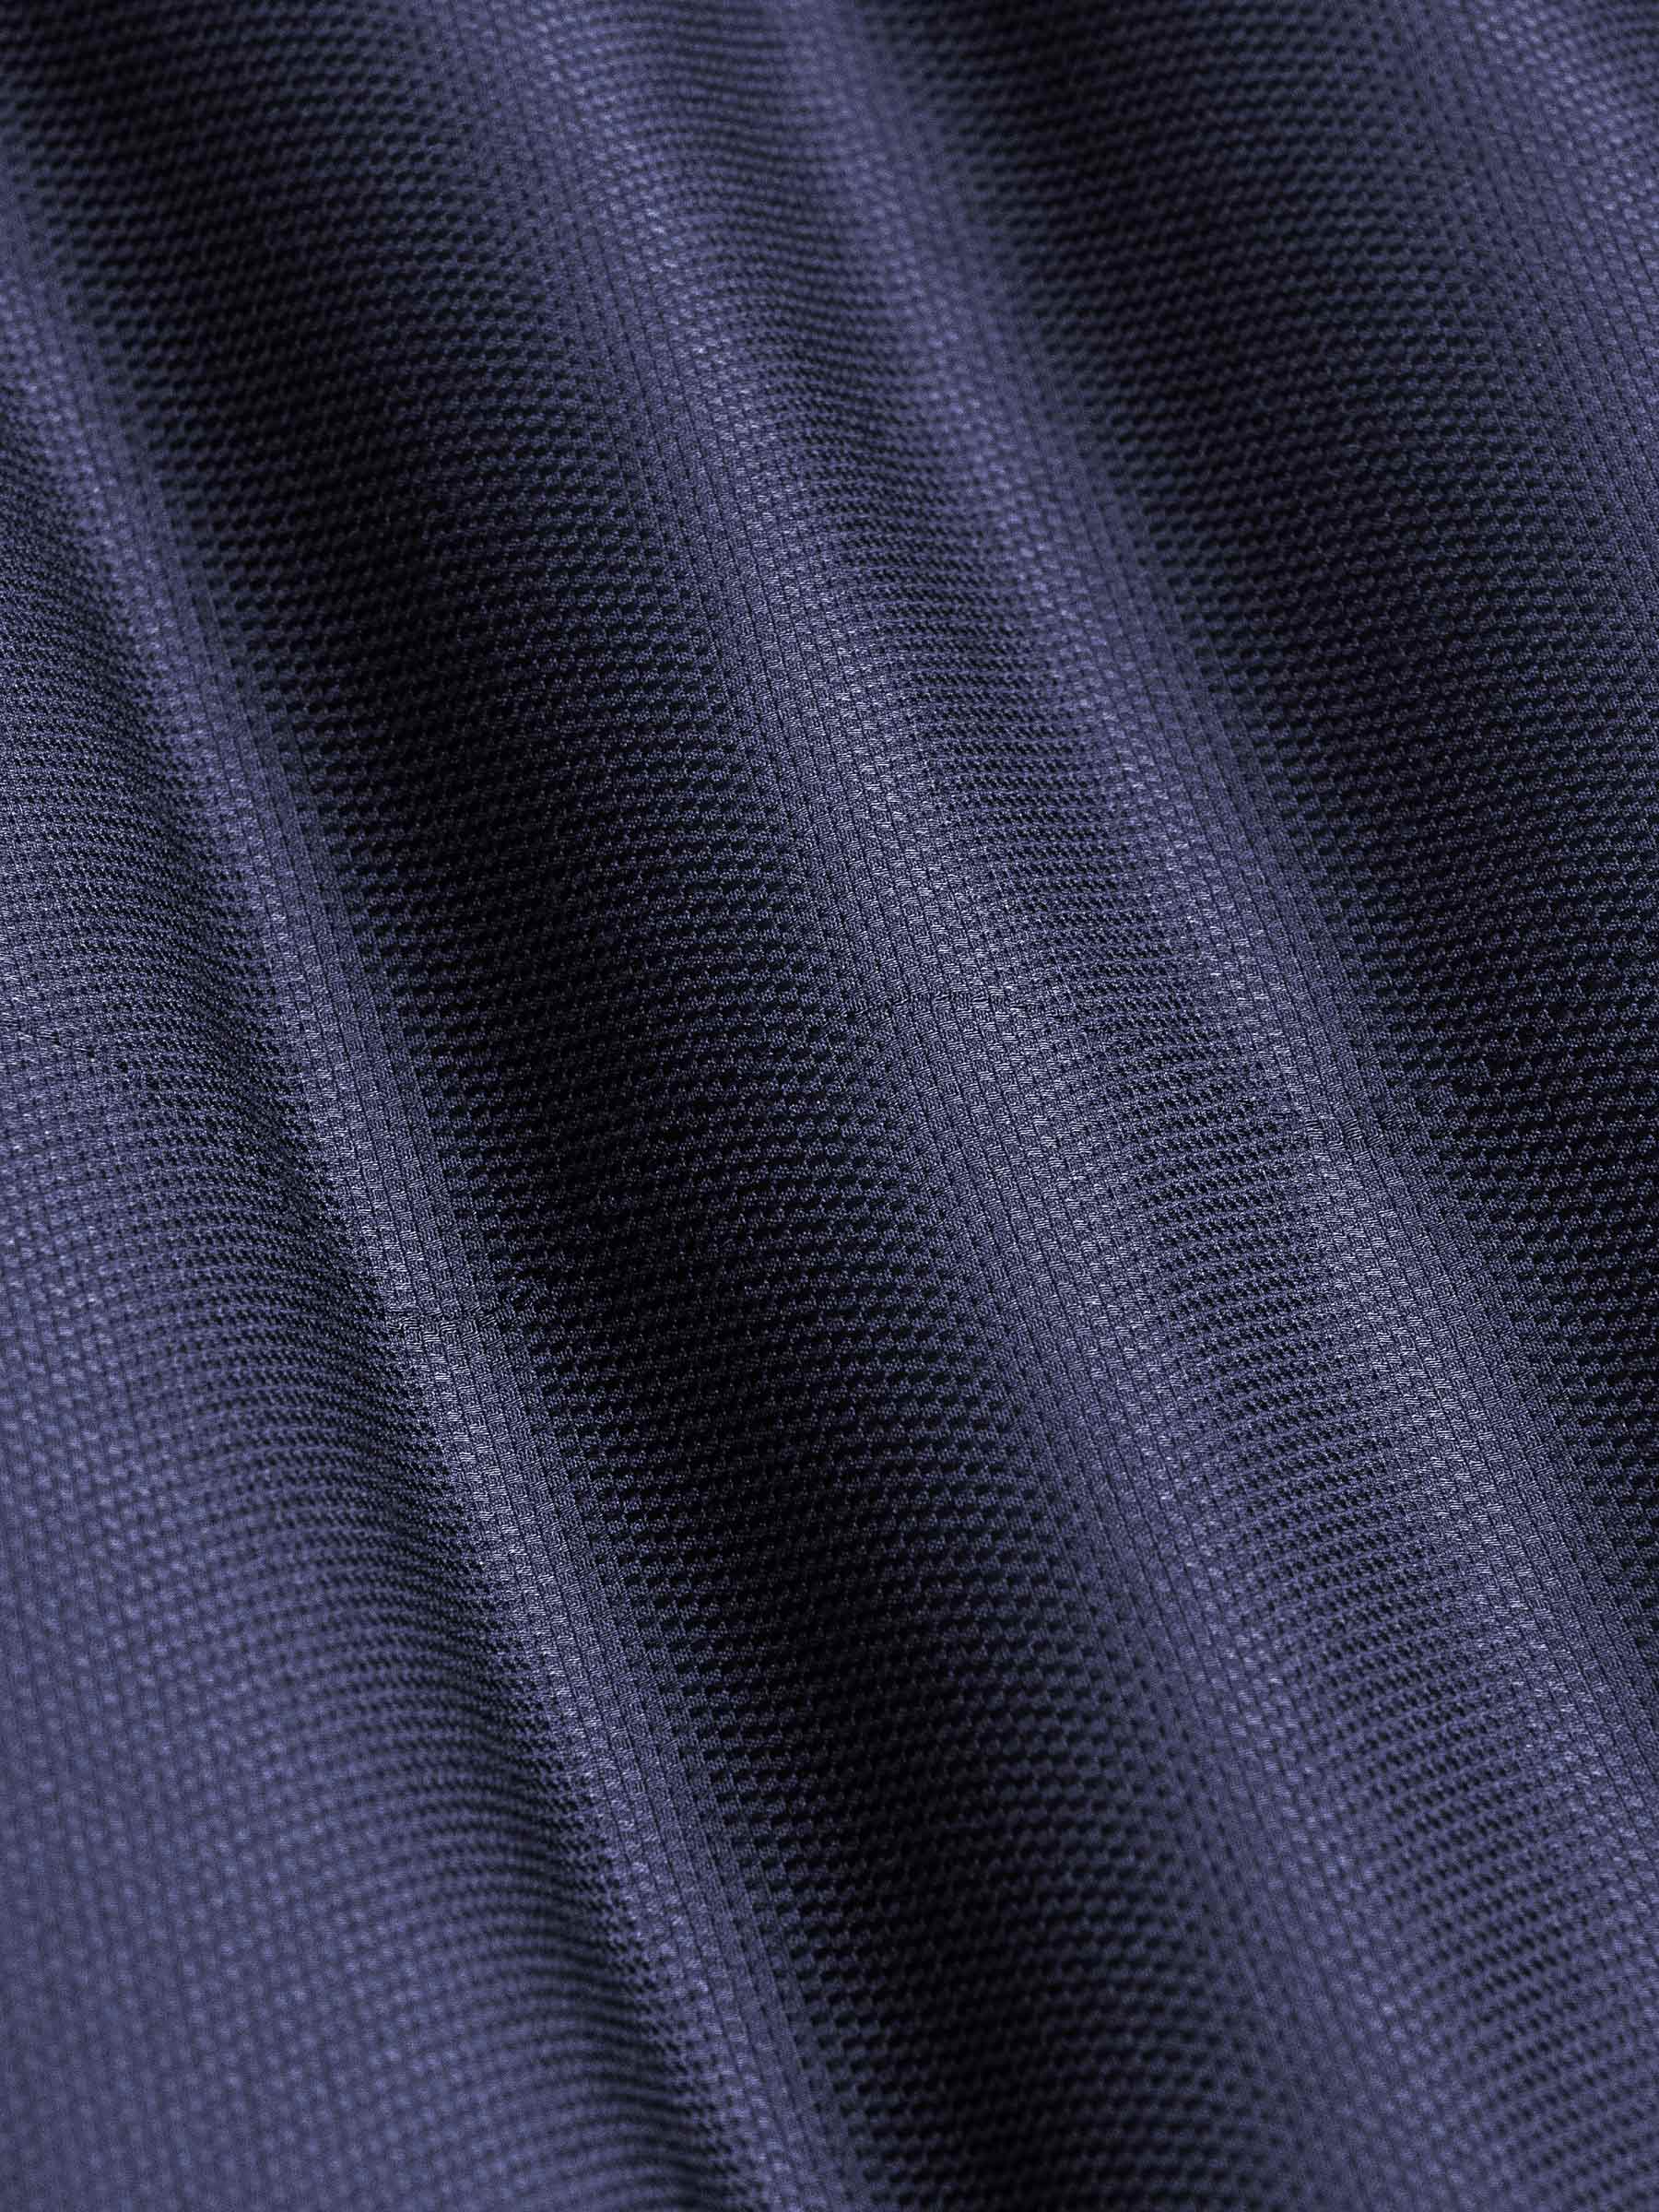 Single Breasted Textured Navy Colbert